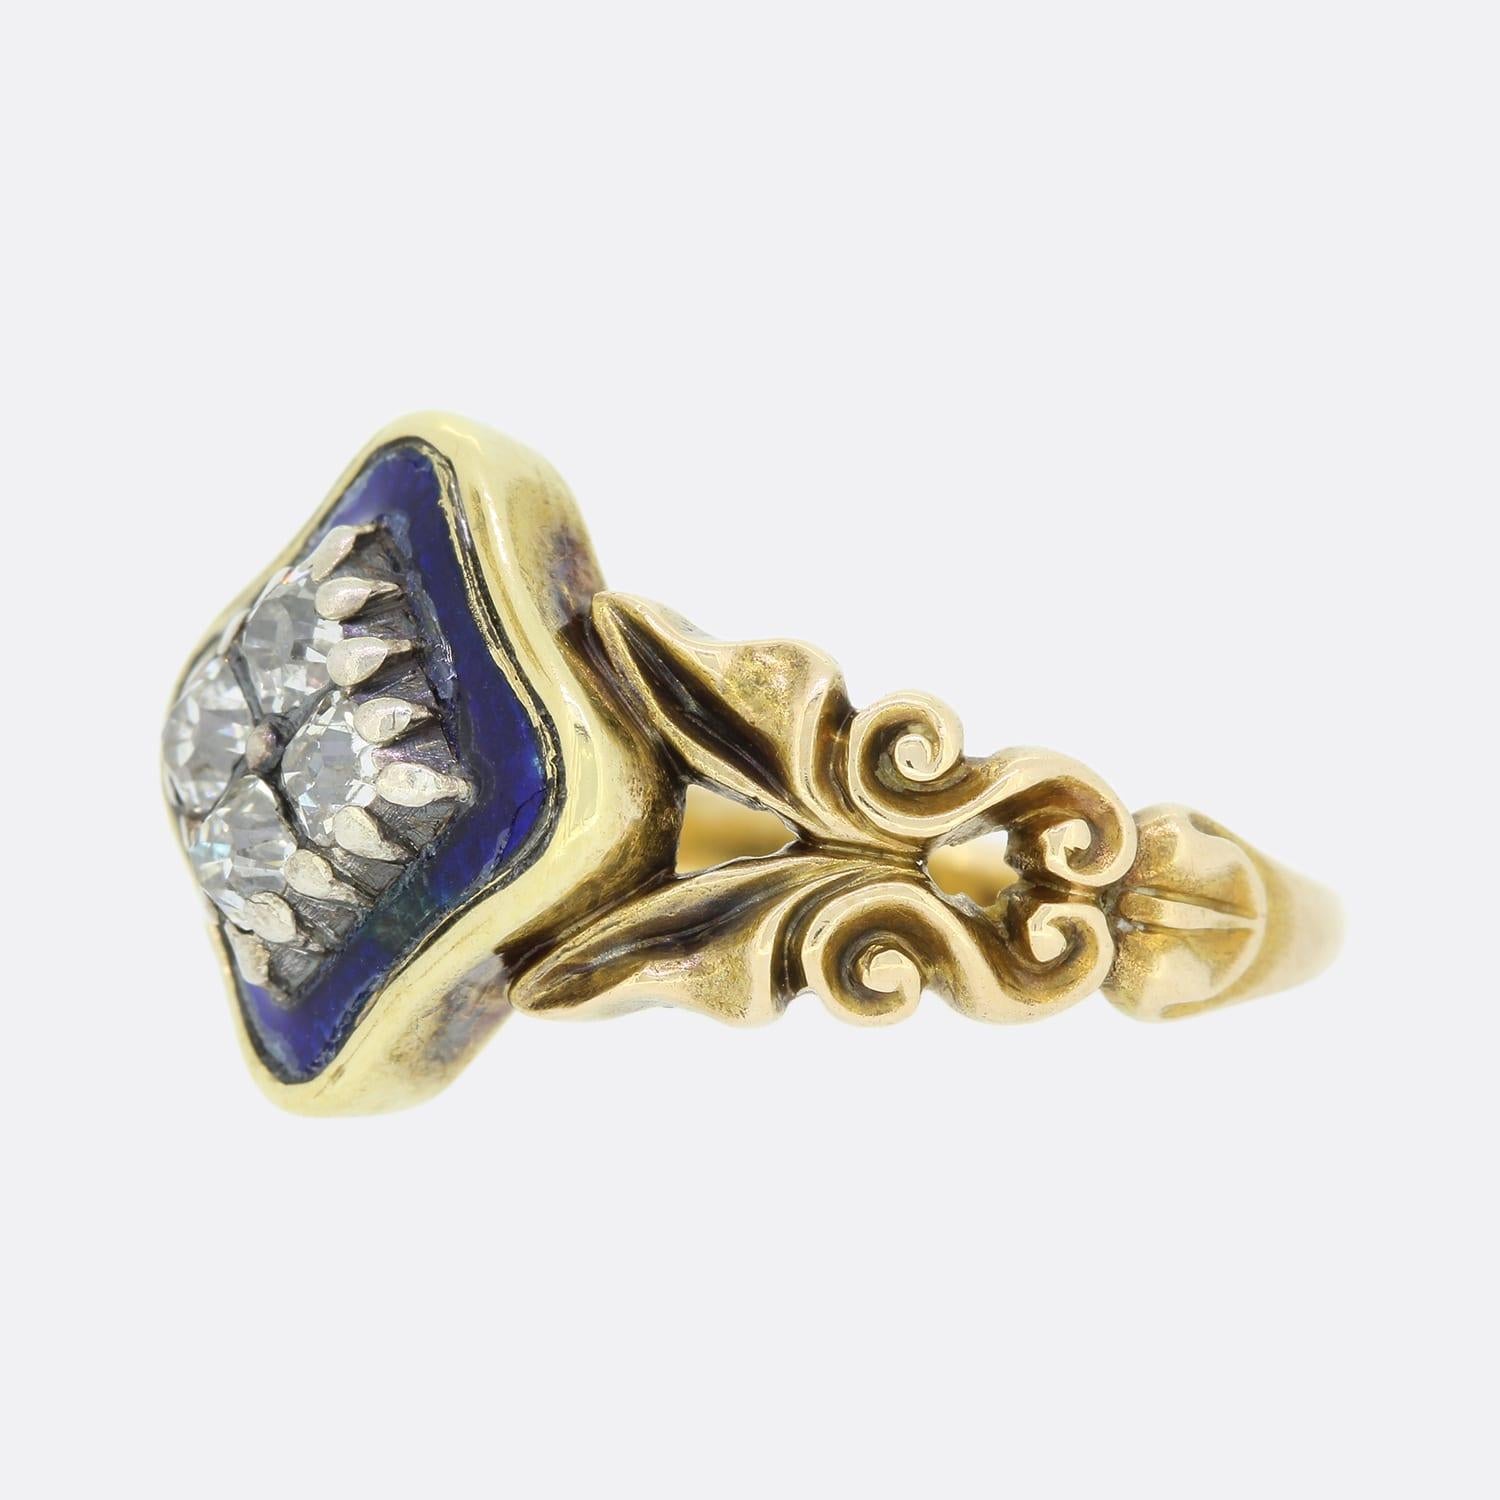 This is a wonderful blue enamel and diamond ring from the Early Victorian era. The 4 old cut diamonds sit in silver cut-down collet settings and are surrounded by a blue enamel border. The ring is excellently crafted and features beautifully